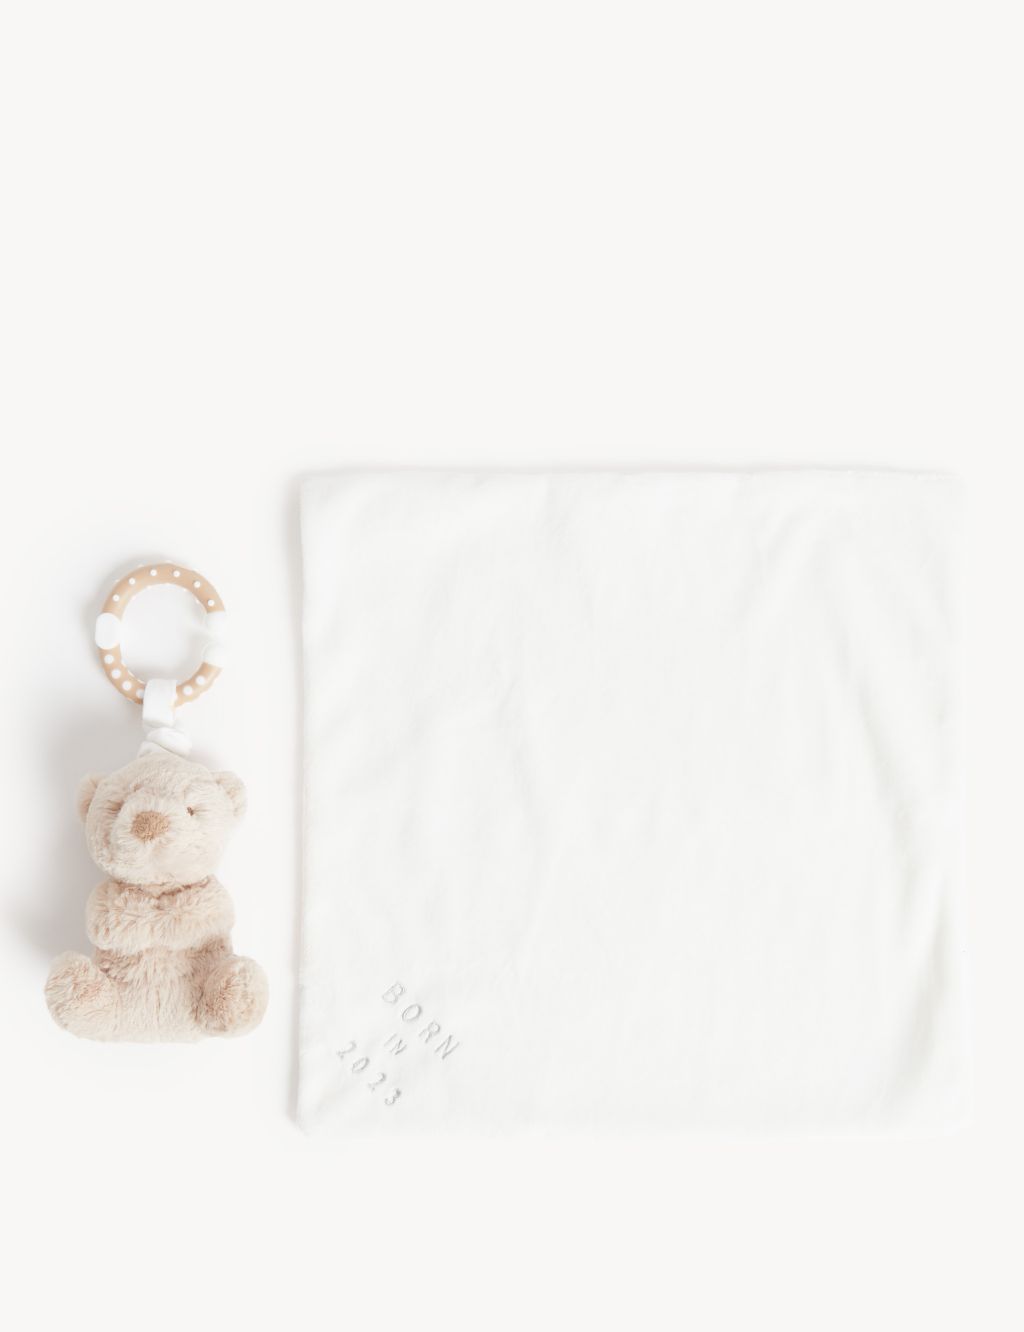 Born In 2023 Soft Toy & Comforter image 2